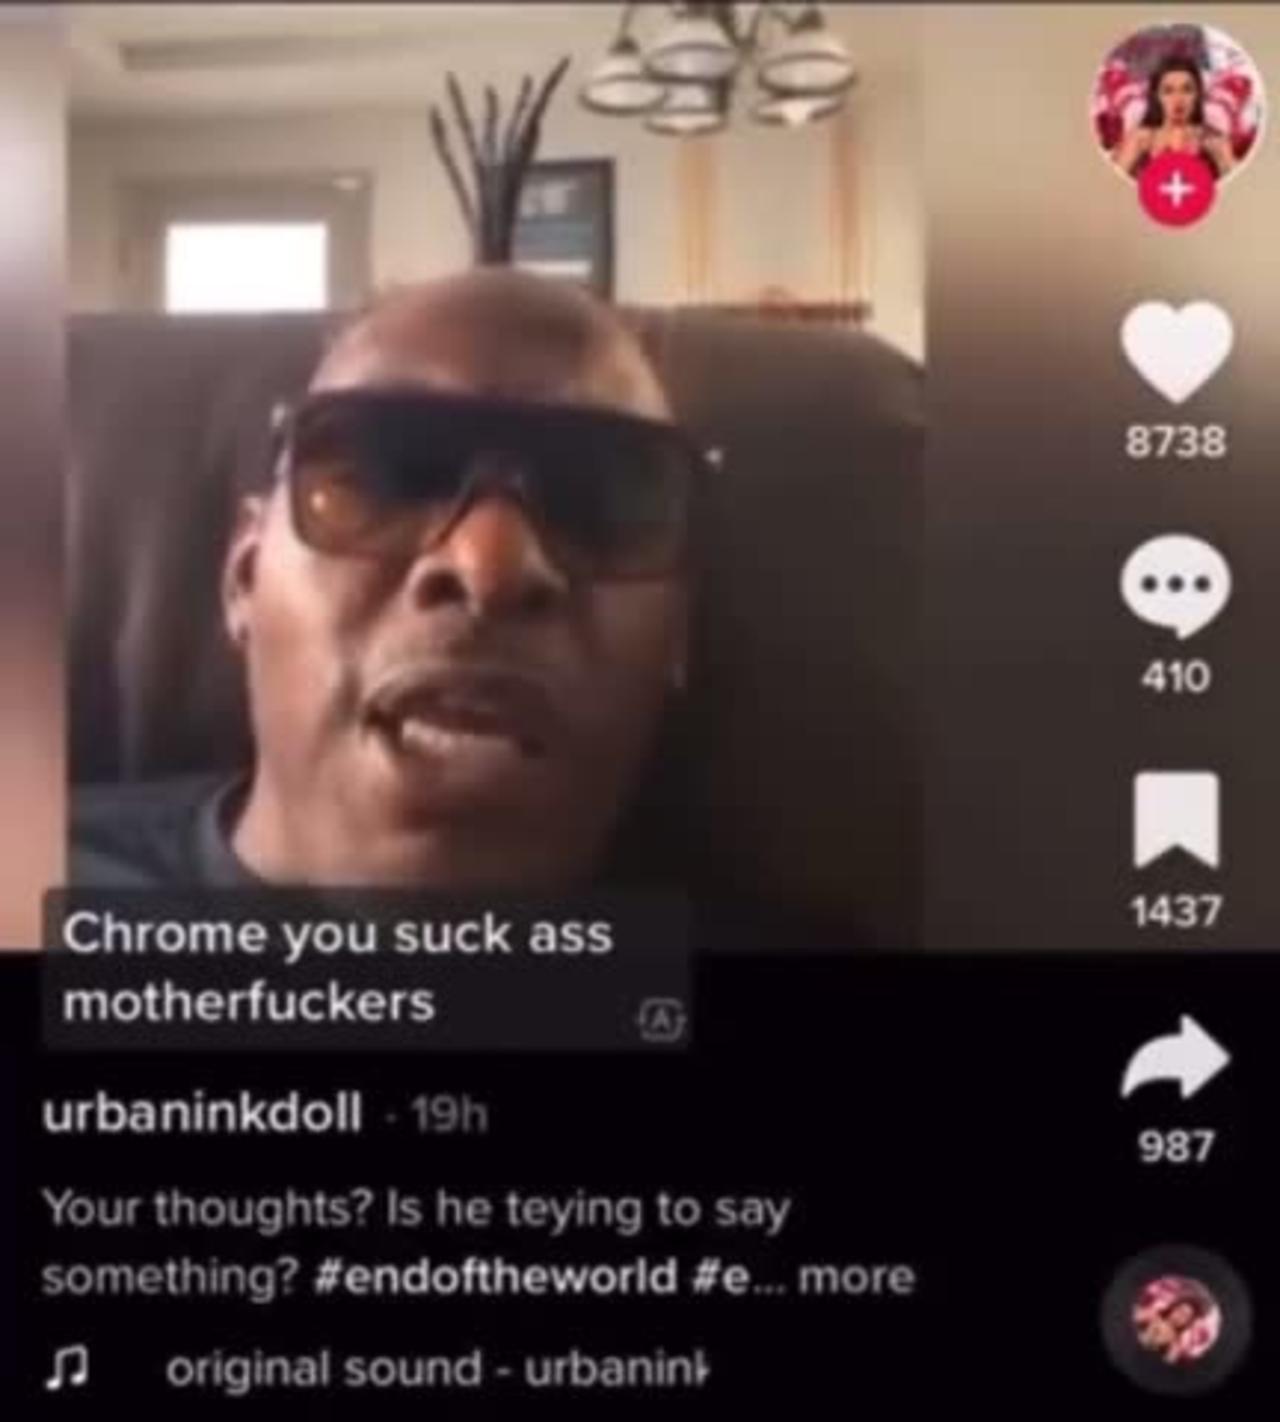 Rapper Coolio “Supposedly” Last Recording Mentions Adrenochrome 👀